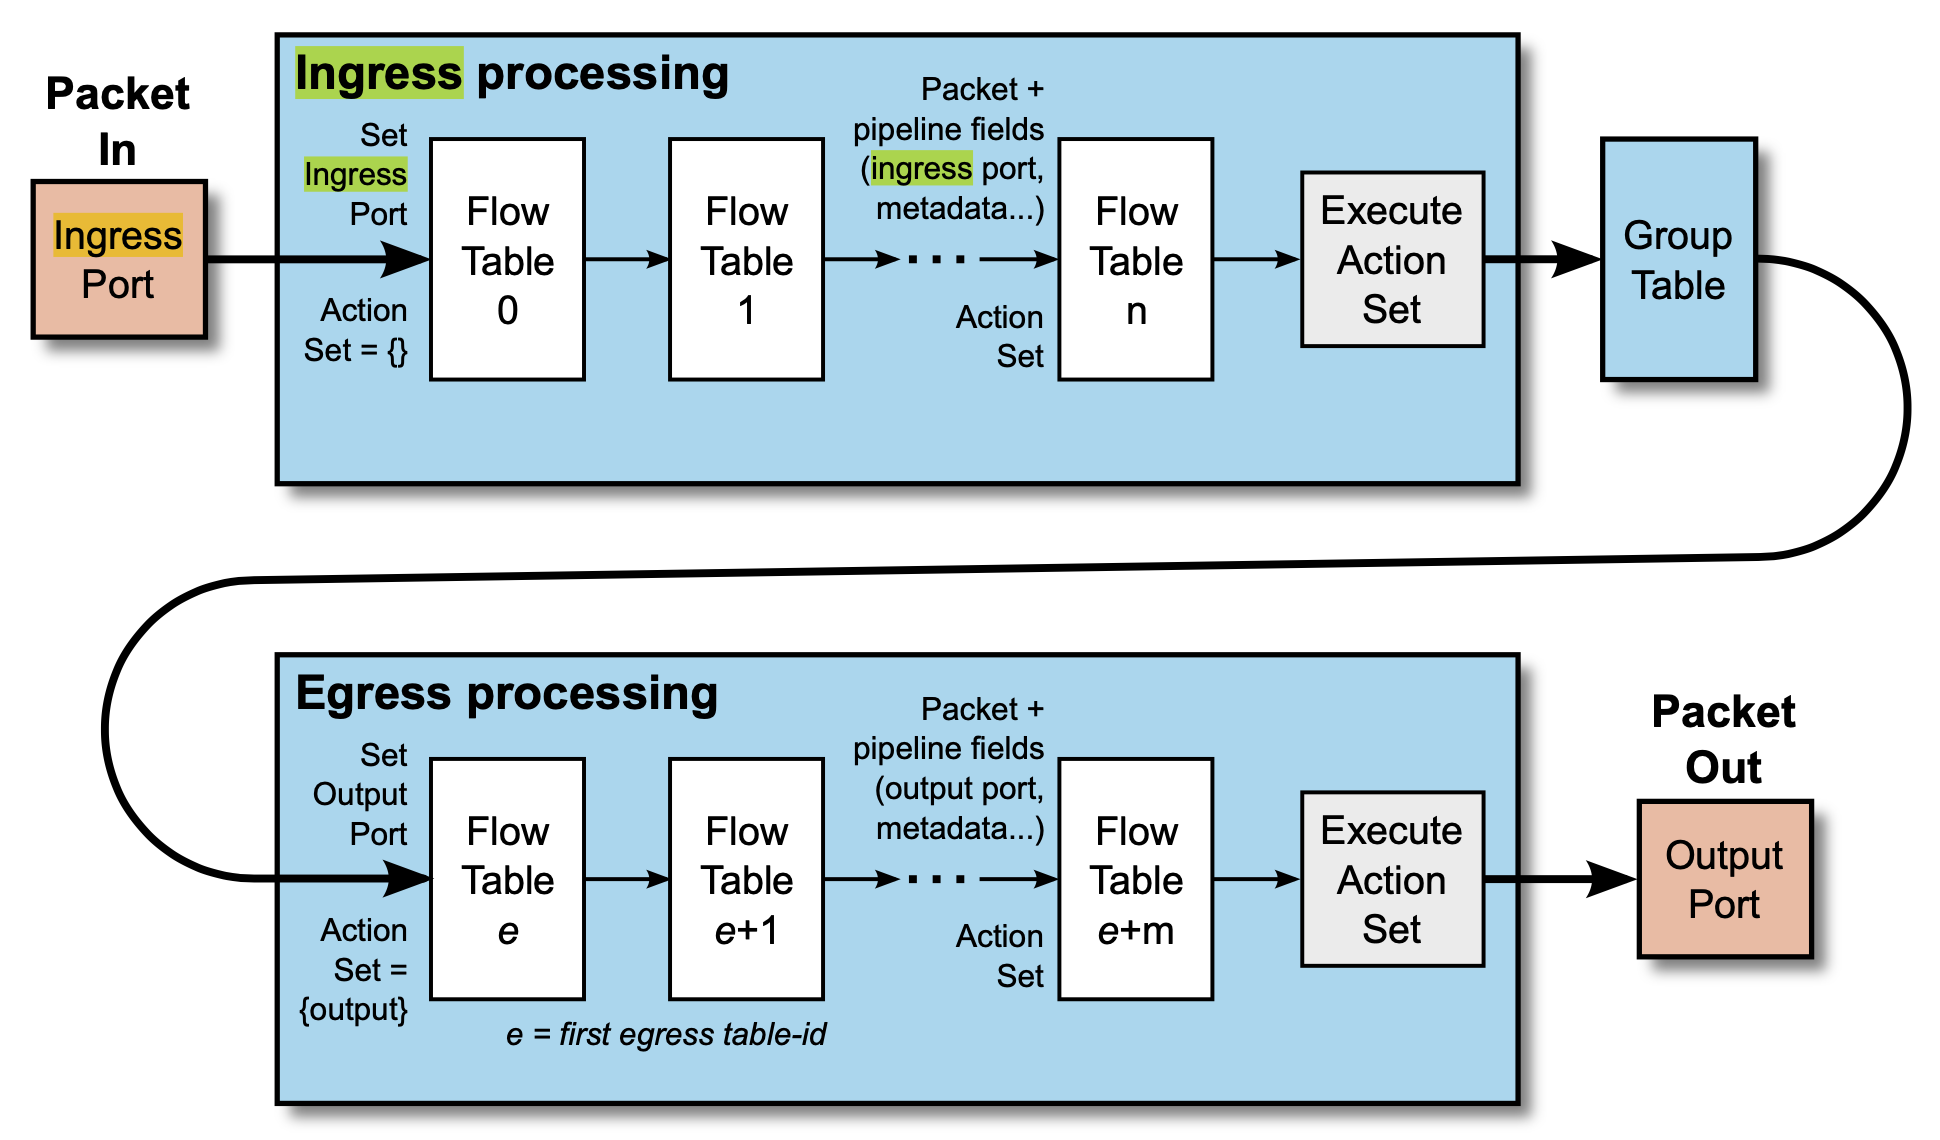 Packet flow through the processing pipeline